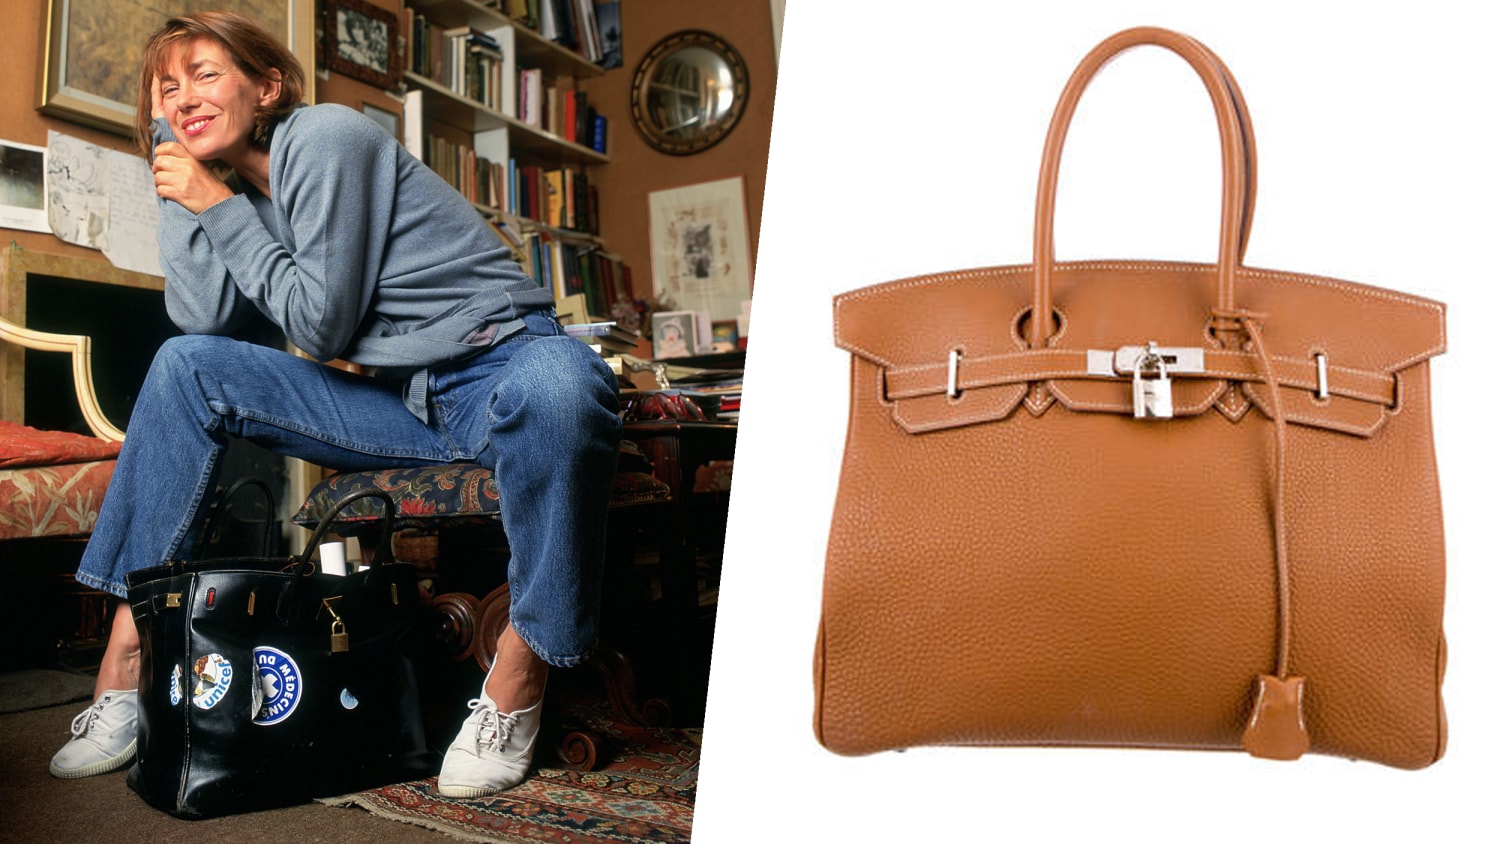 Iconic handbags and the women who inspired them